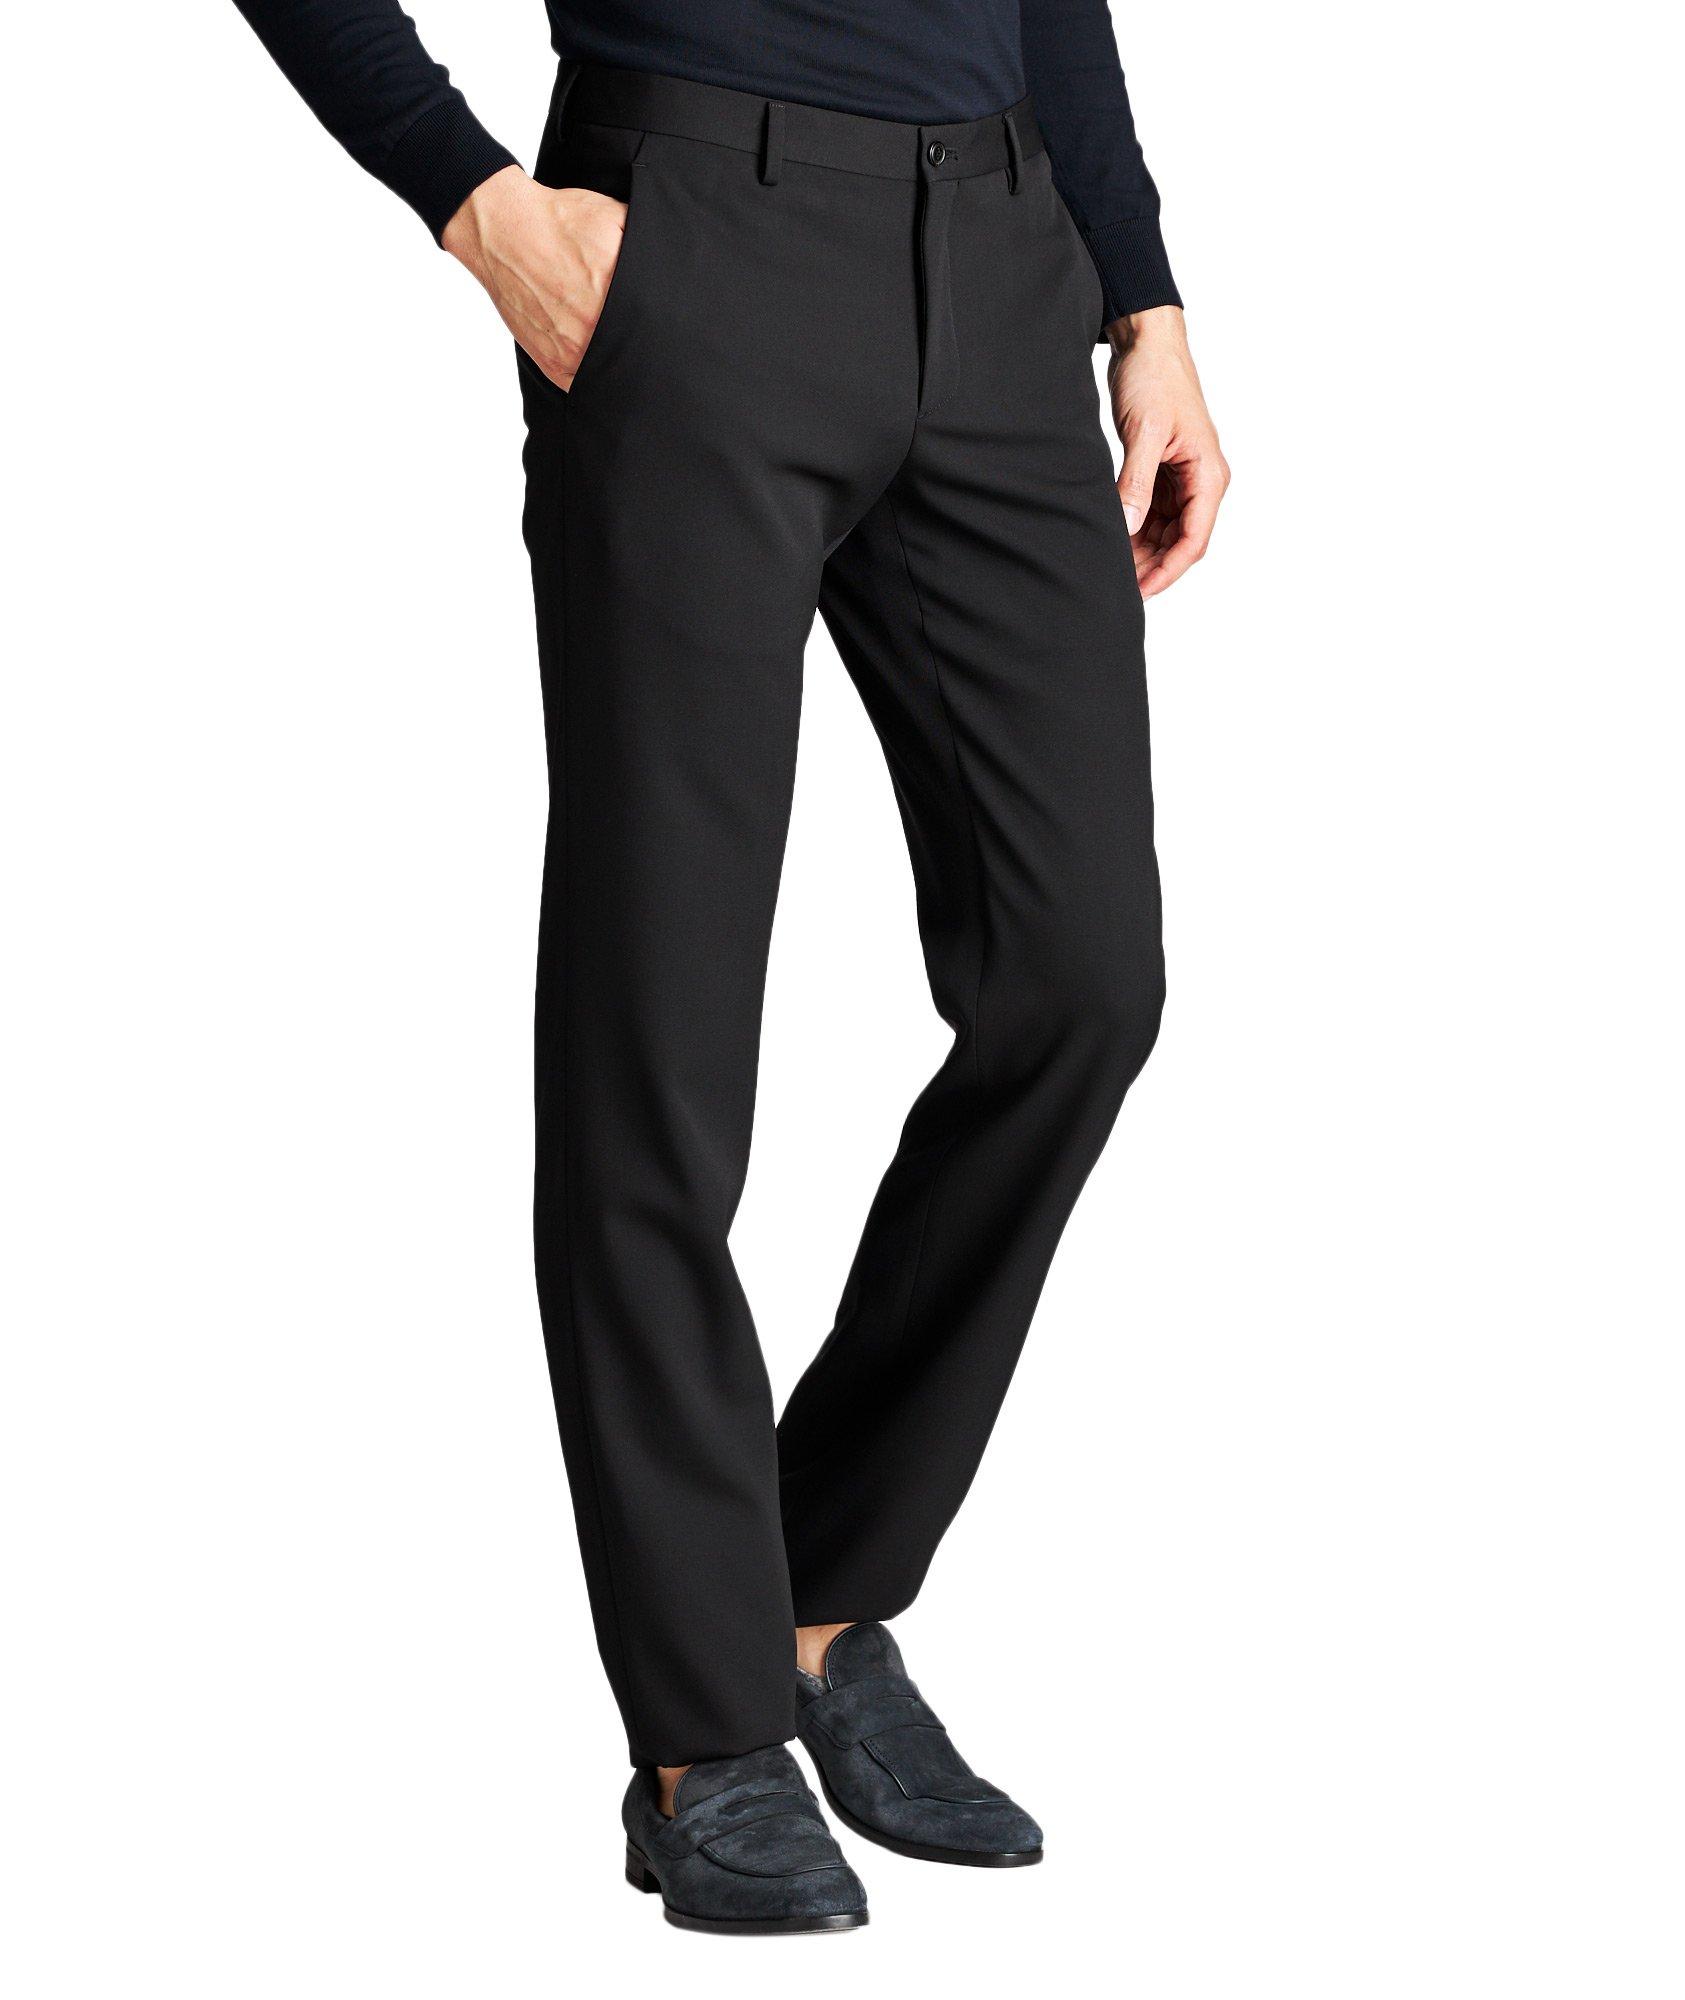 Stretch-Virgin Wool Trousers image 0